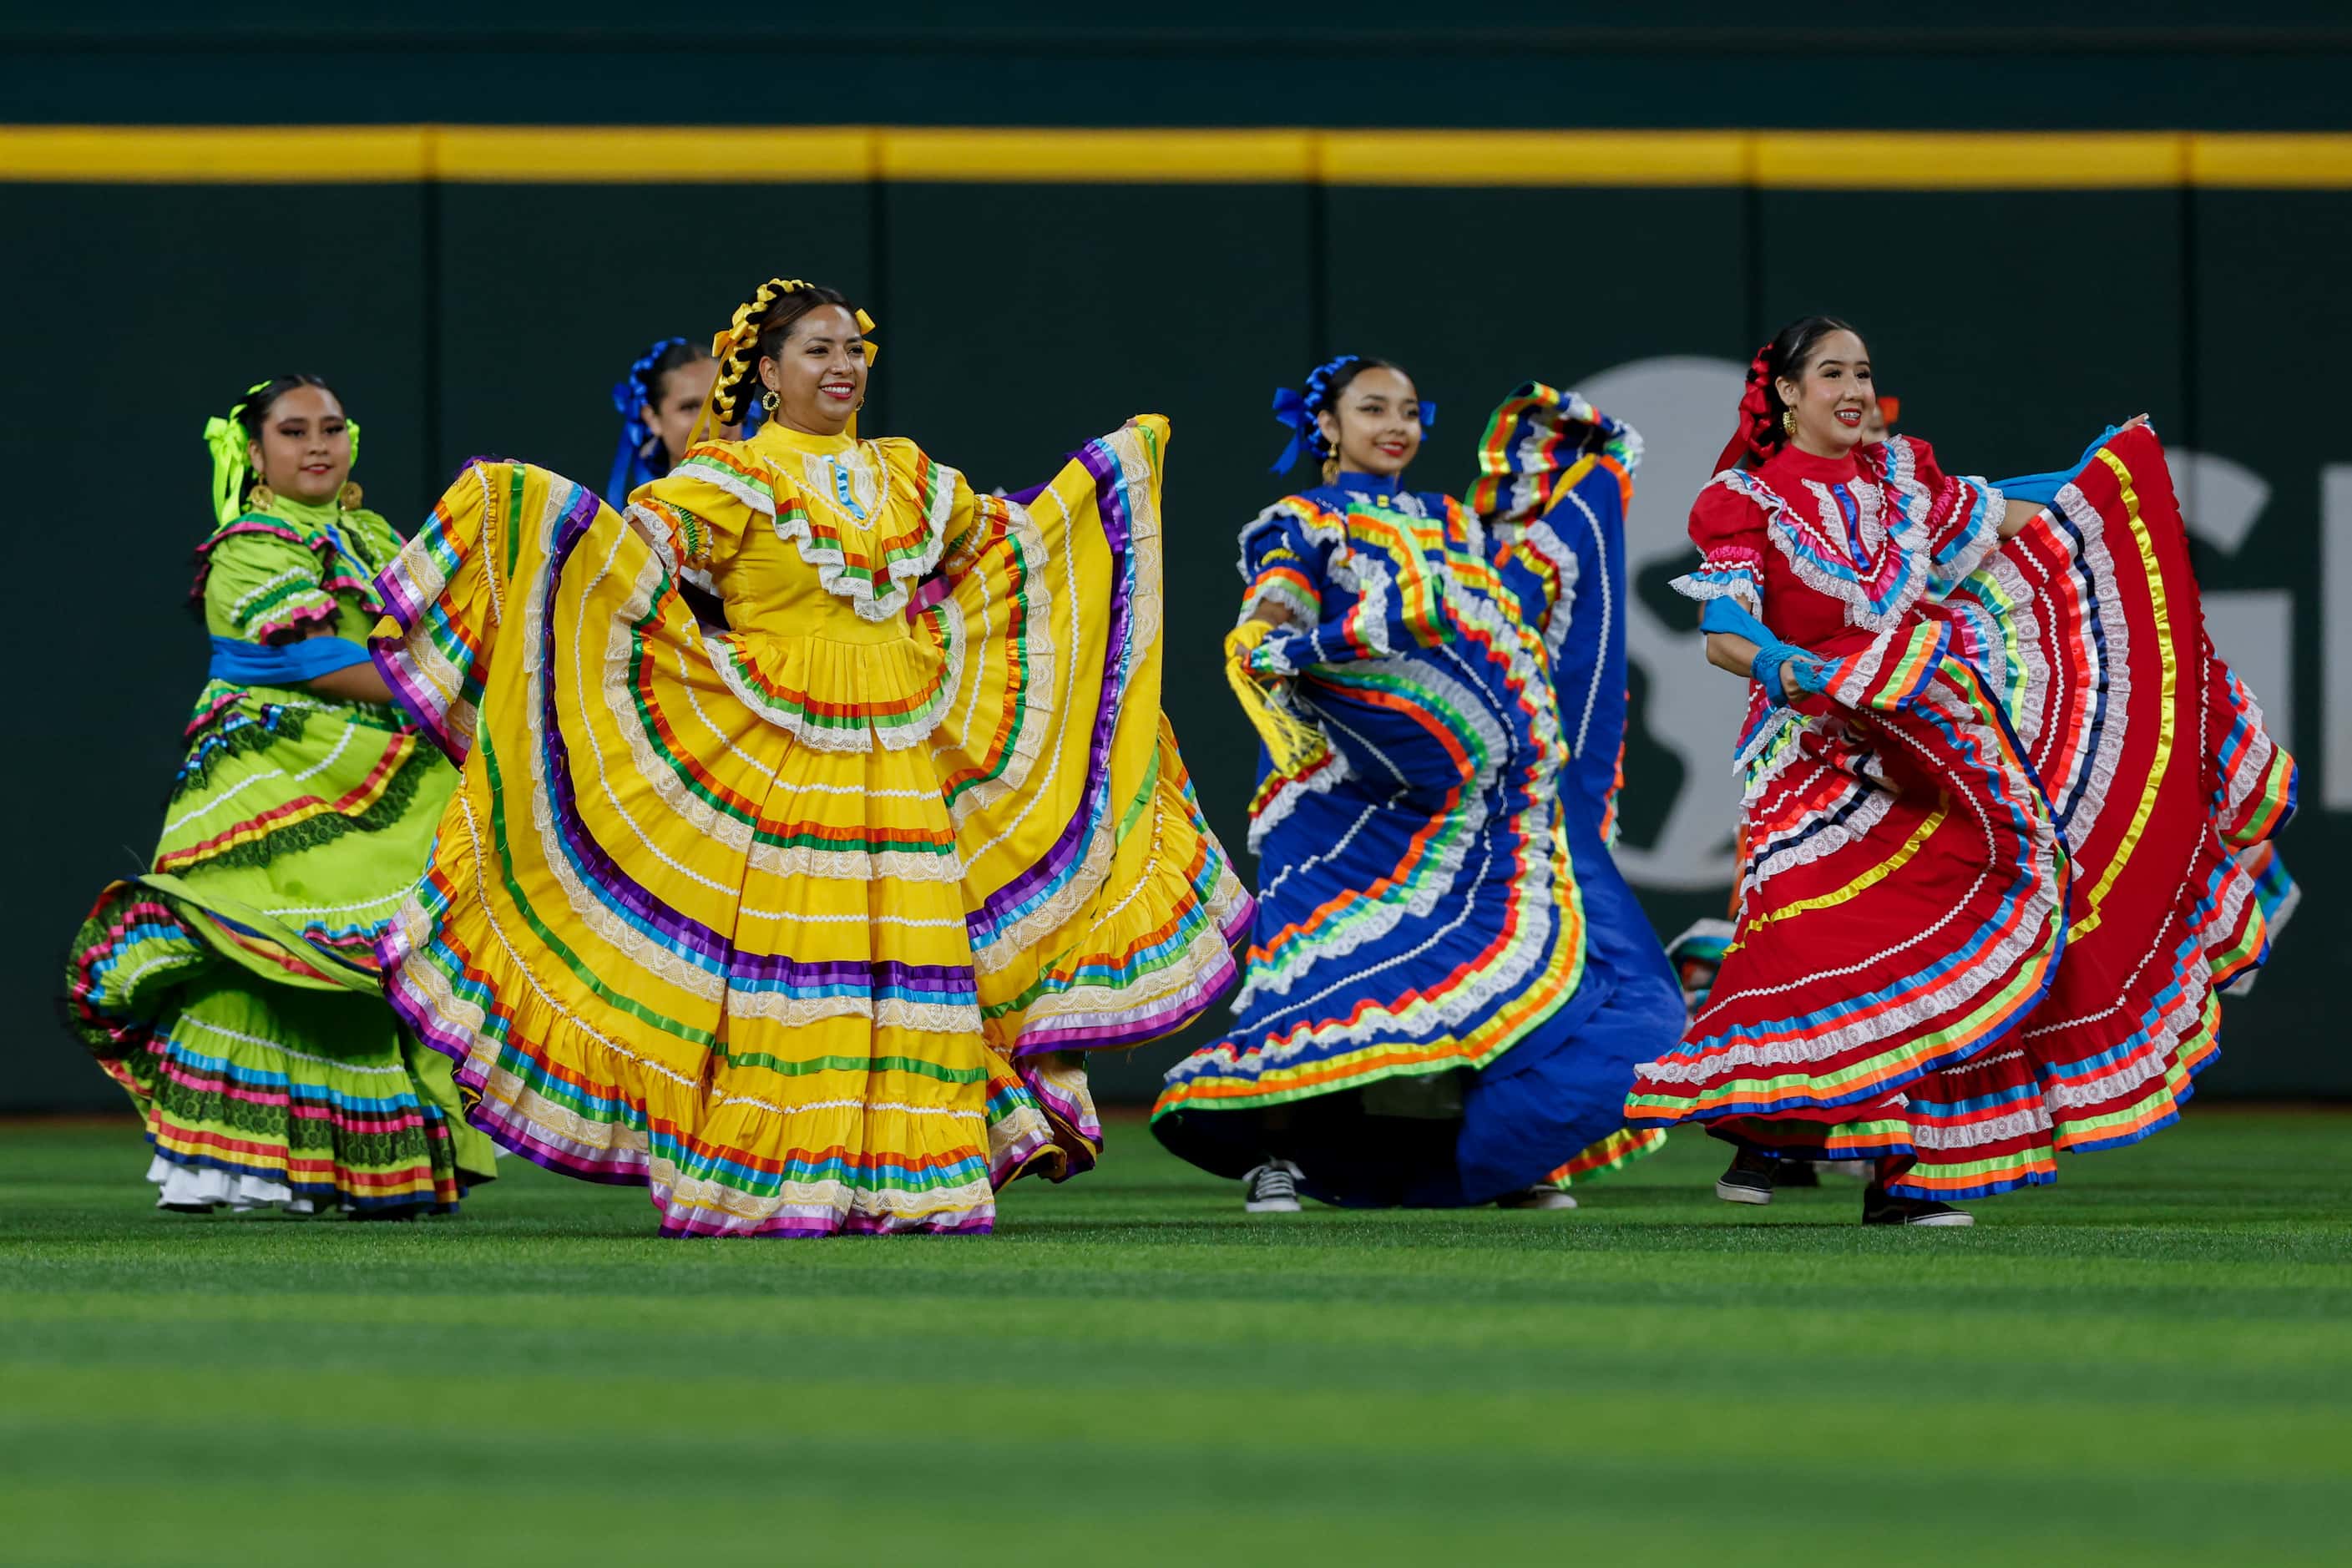 Folklórico dancers perform in the outfield as part of the Texas Rangers celebration of...